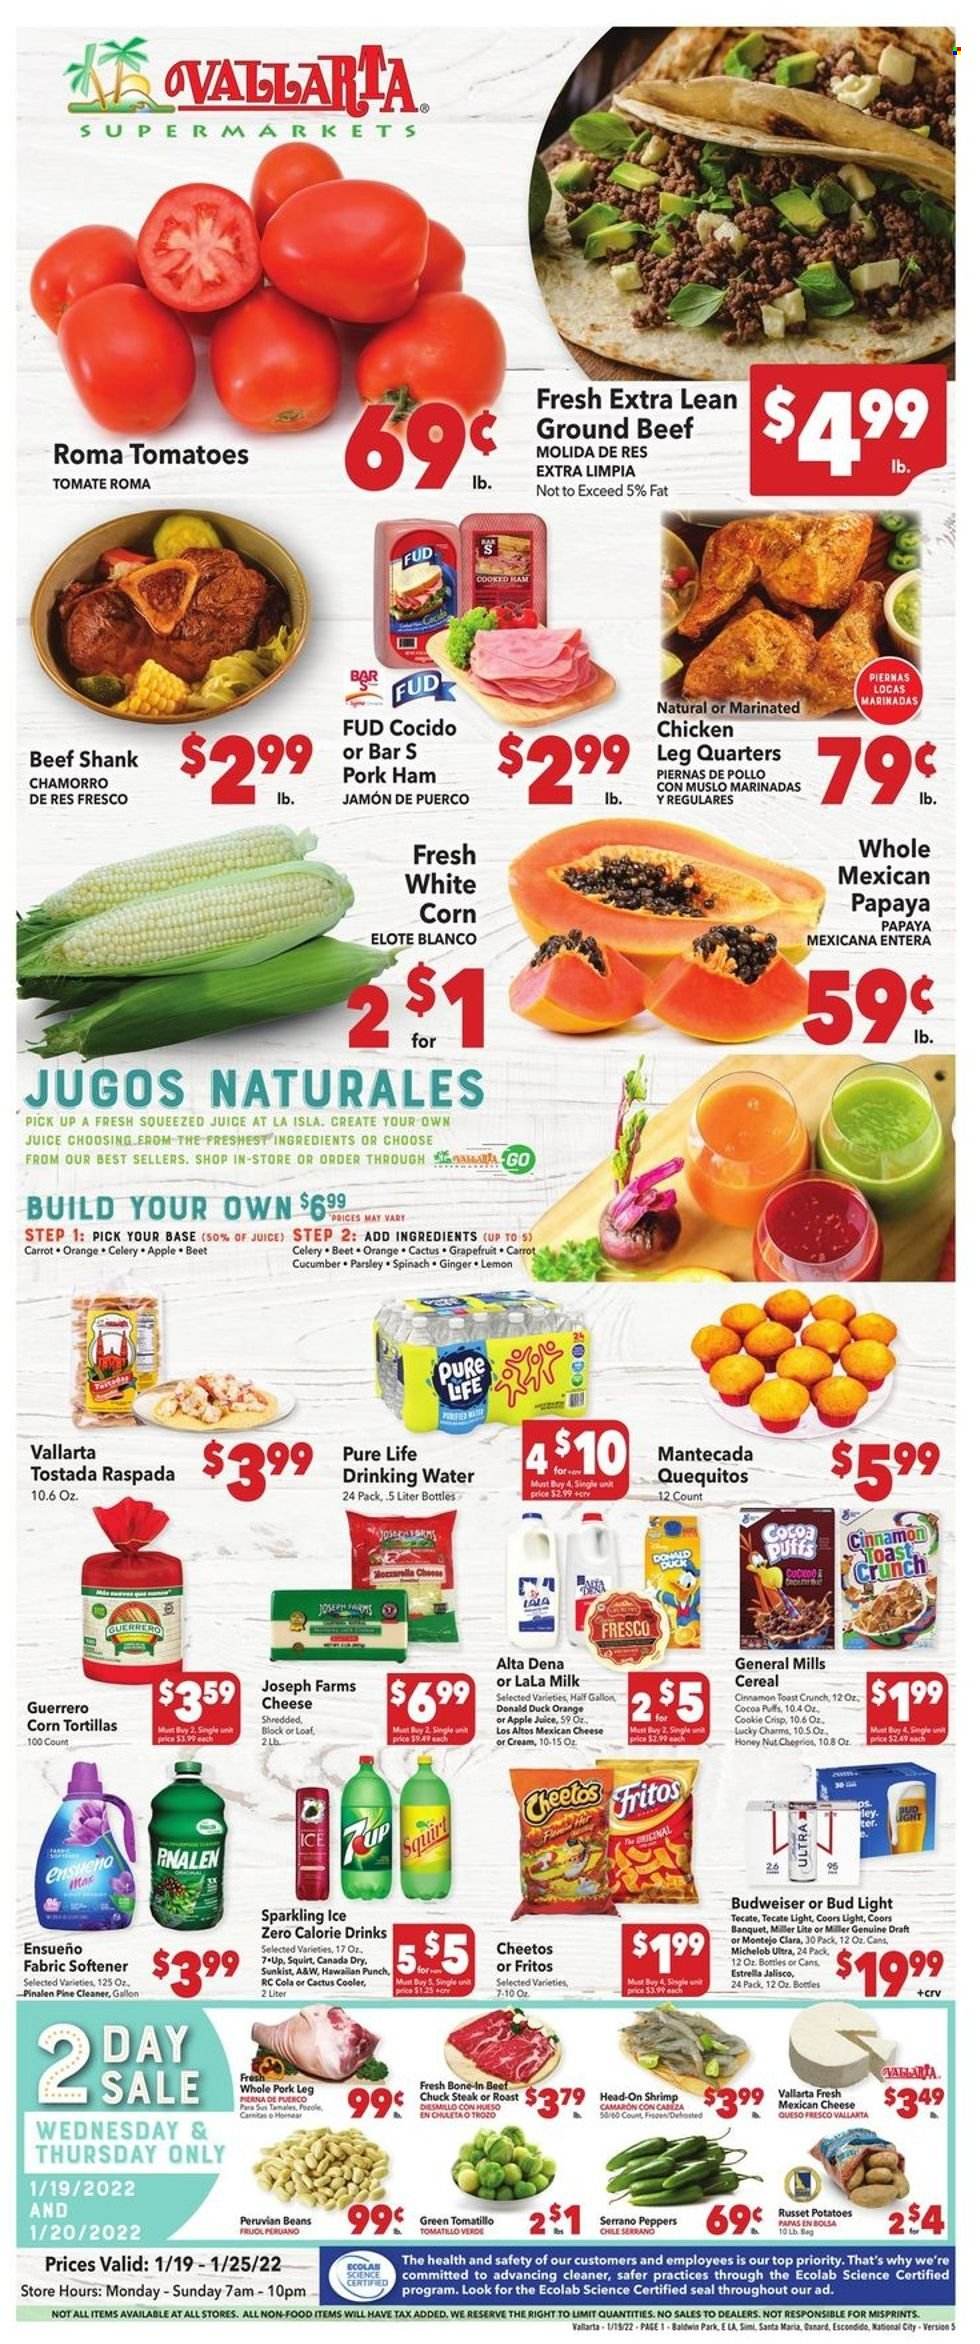 thumbnail - Vallarta Flyer - 01/19/2022 - 01/25/2022 - Sales products - corn tortillas, tortillas, puffs, ginger, russet potatoes, tomatillo, tomatoes, potatoes, parsley, grapefruits, papaya, oranges, beef meat, beef shank, ground beef, steak, chuck steak, pork meat, pork leg, shrimps, cooked ham, ham, queso fresco, milk, Fritos, Cheetos, cereals, cinnamon, apple juice, Canada Dry, juice, 7UP, punch, beer, Bud Light, cleaner, fabric softener, cactus, Budweiser, Miller Lite, Coors, Michelob. Page 1.